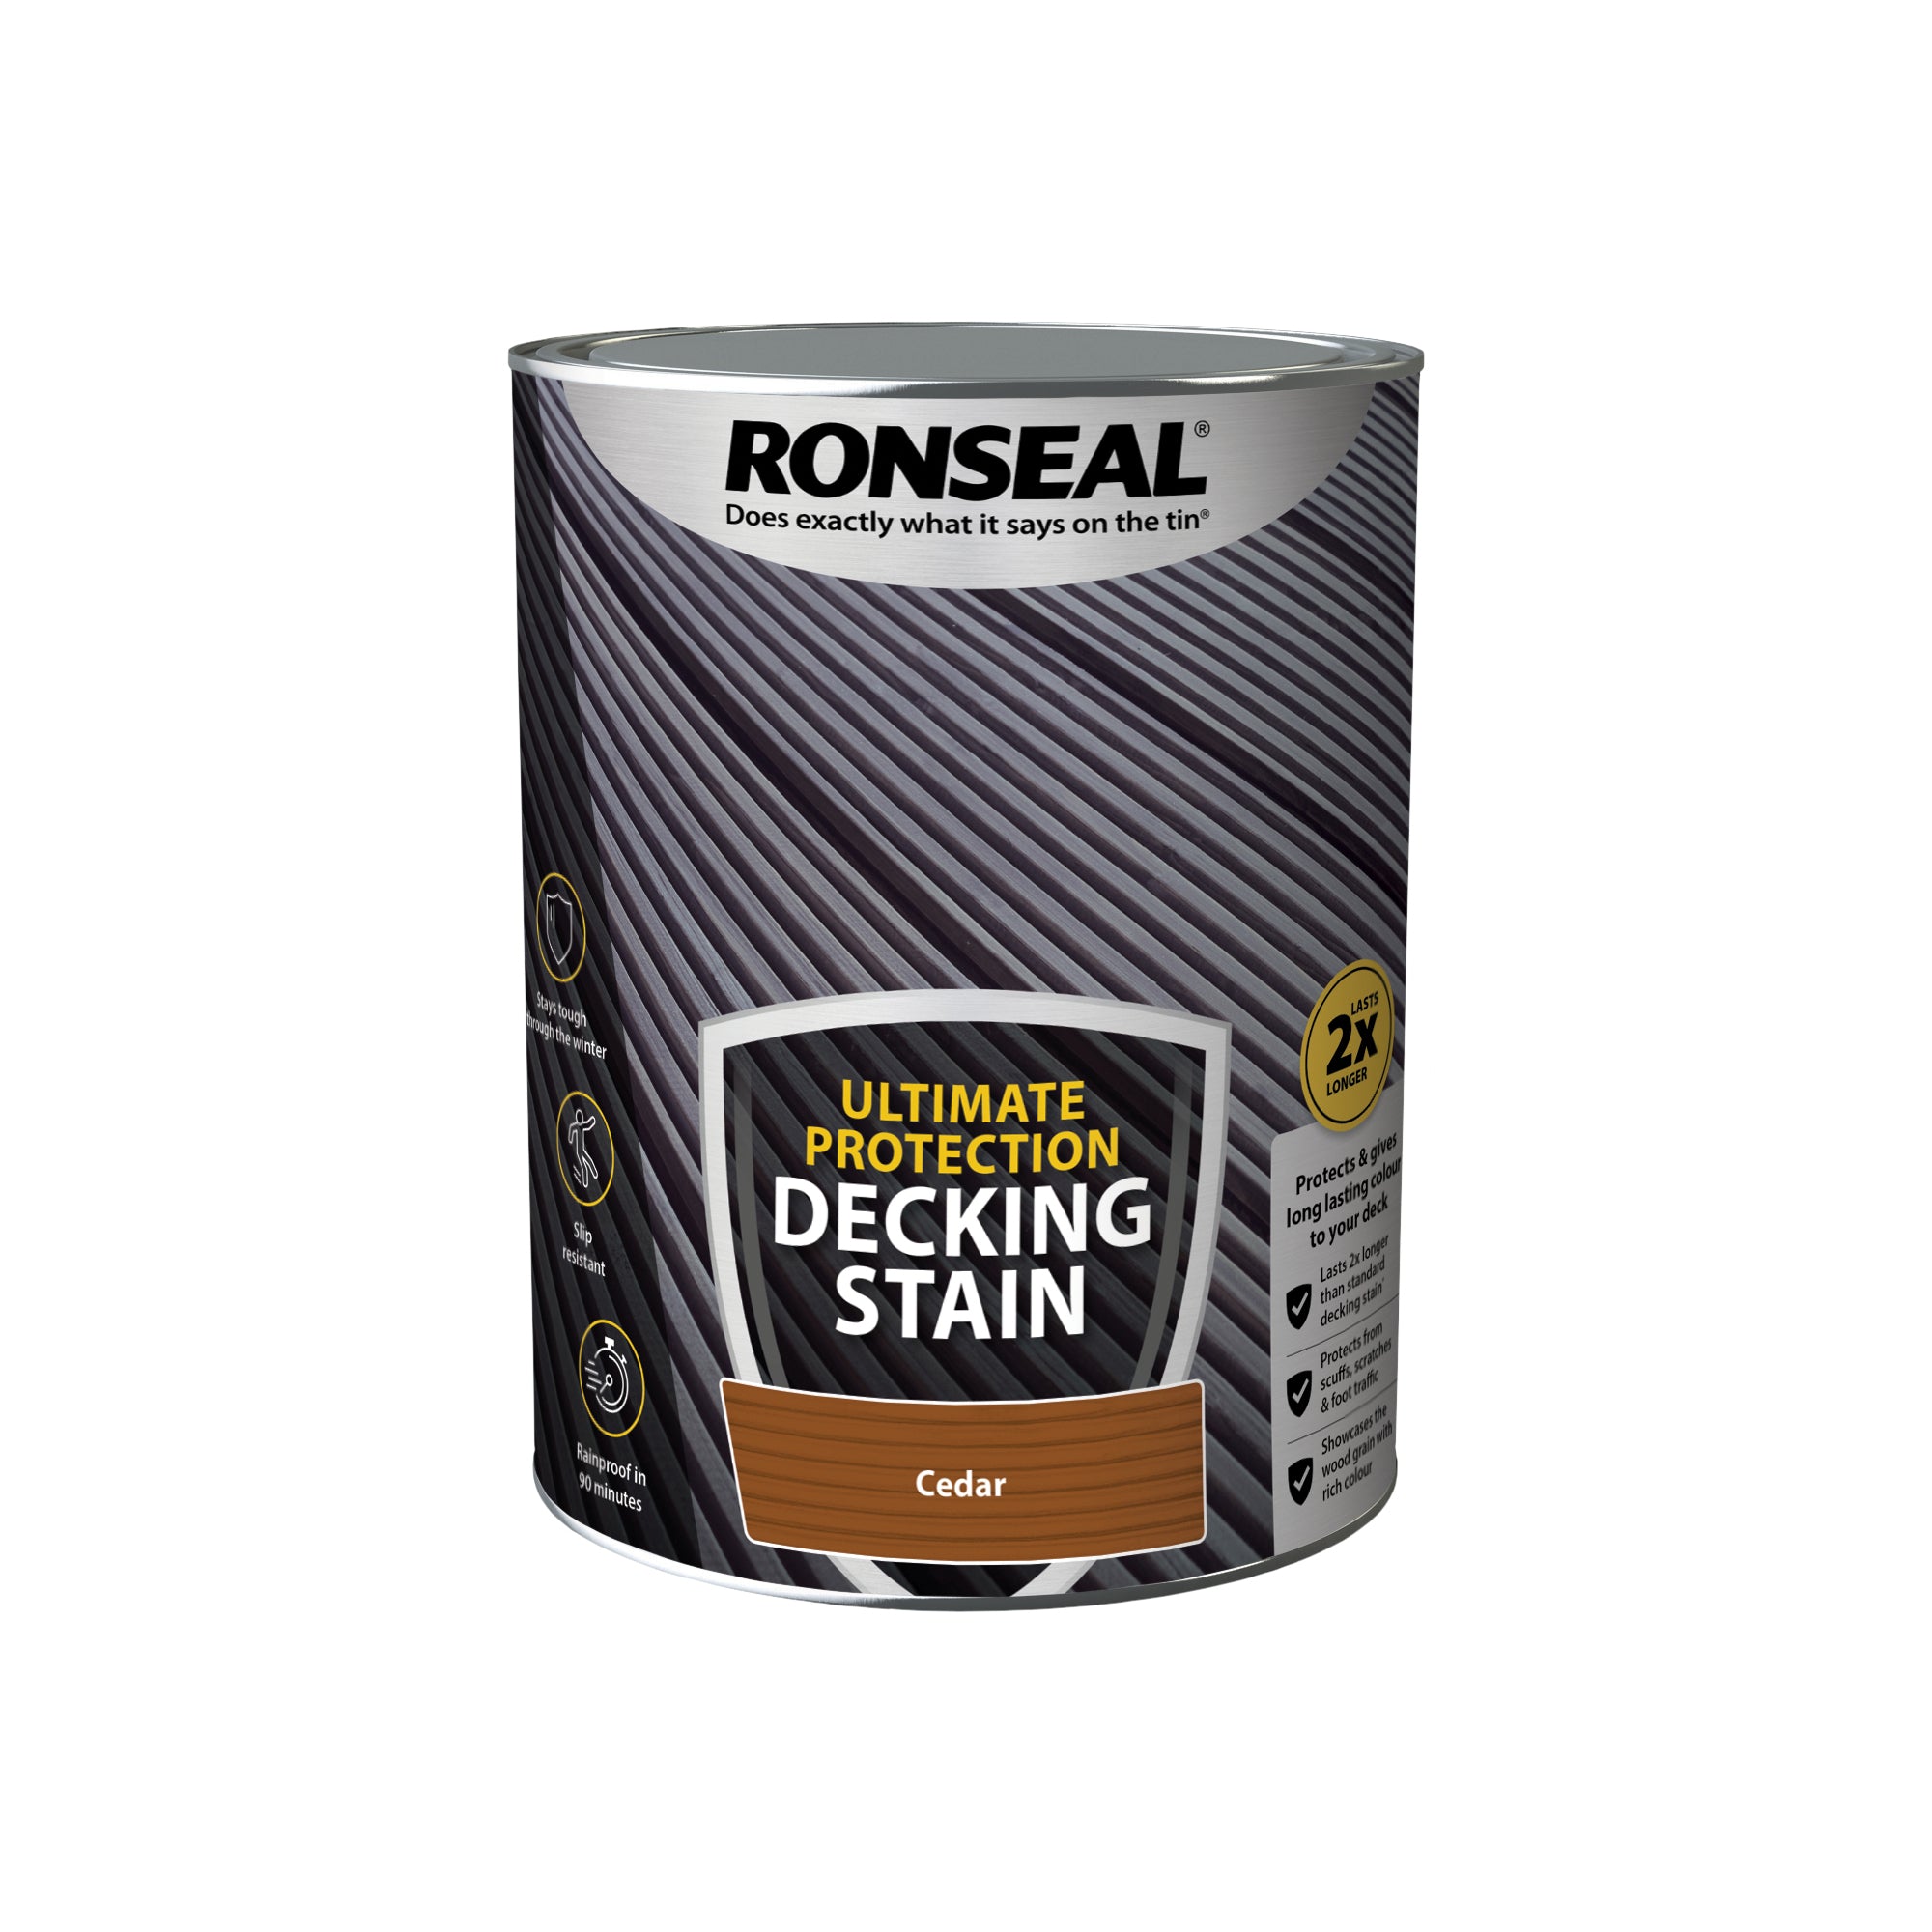 Ronseal-Ultimate-Protection-Decking-Stain-Cedar-5L